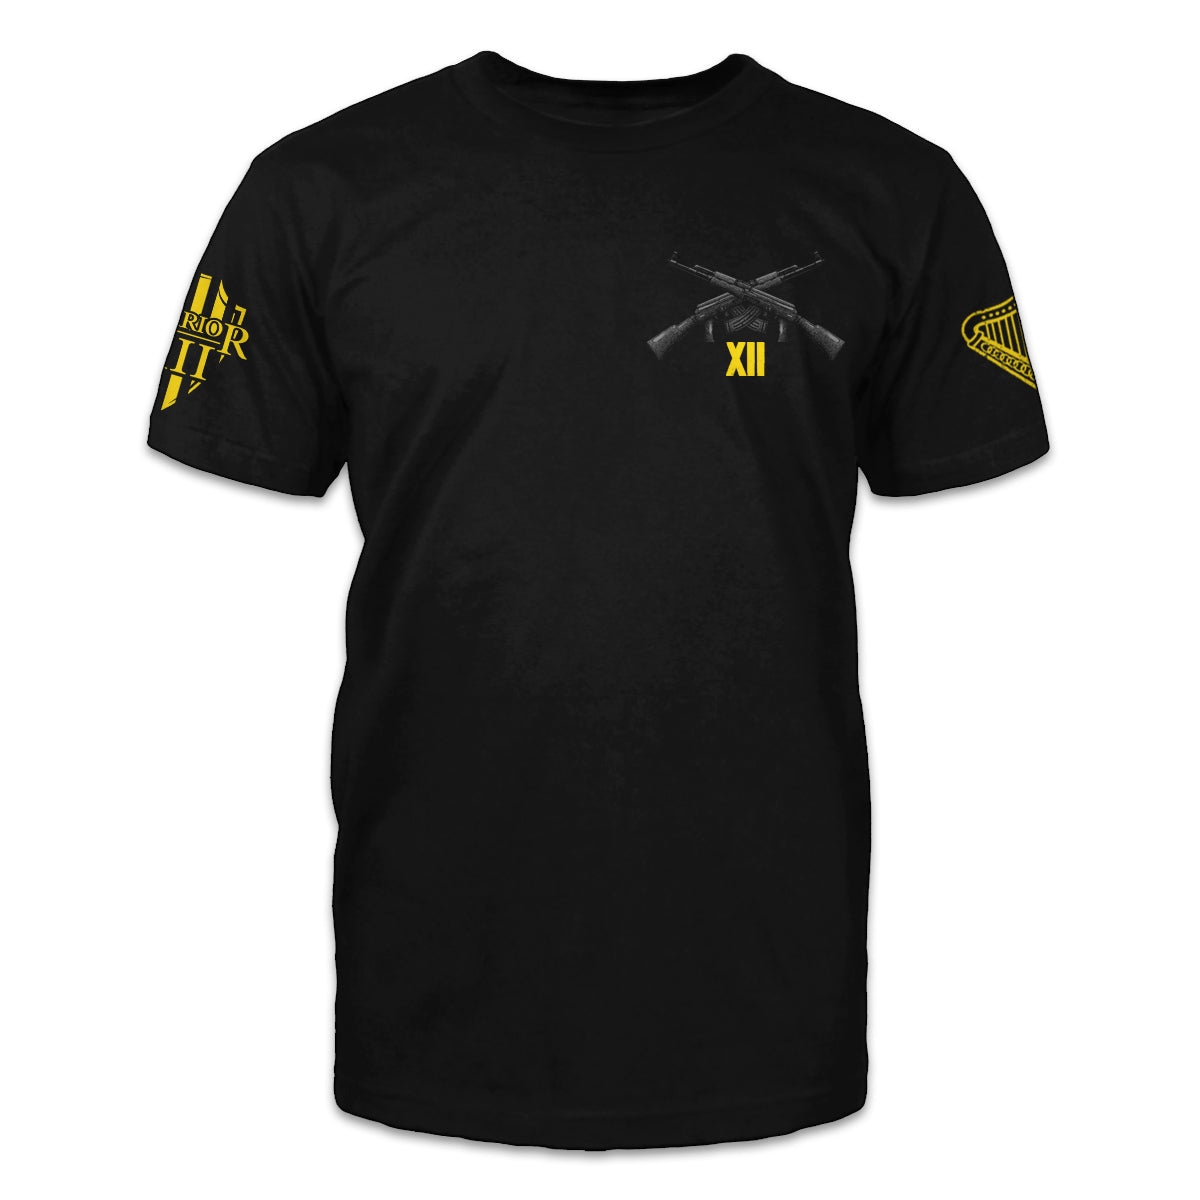 A black t-shirt with two guns crossed over with the roman numerals XII printed on the front of the shirt.